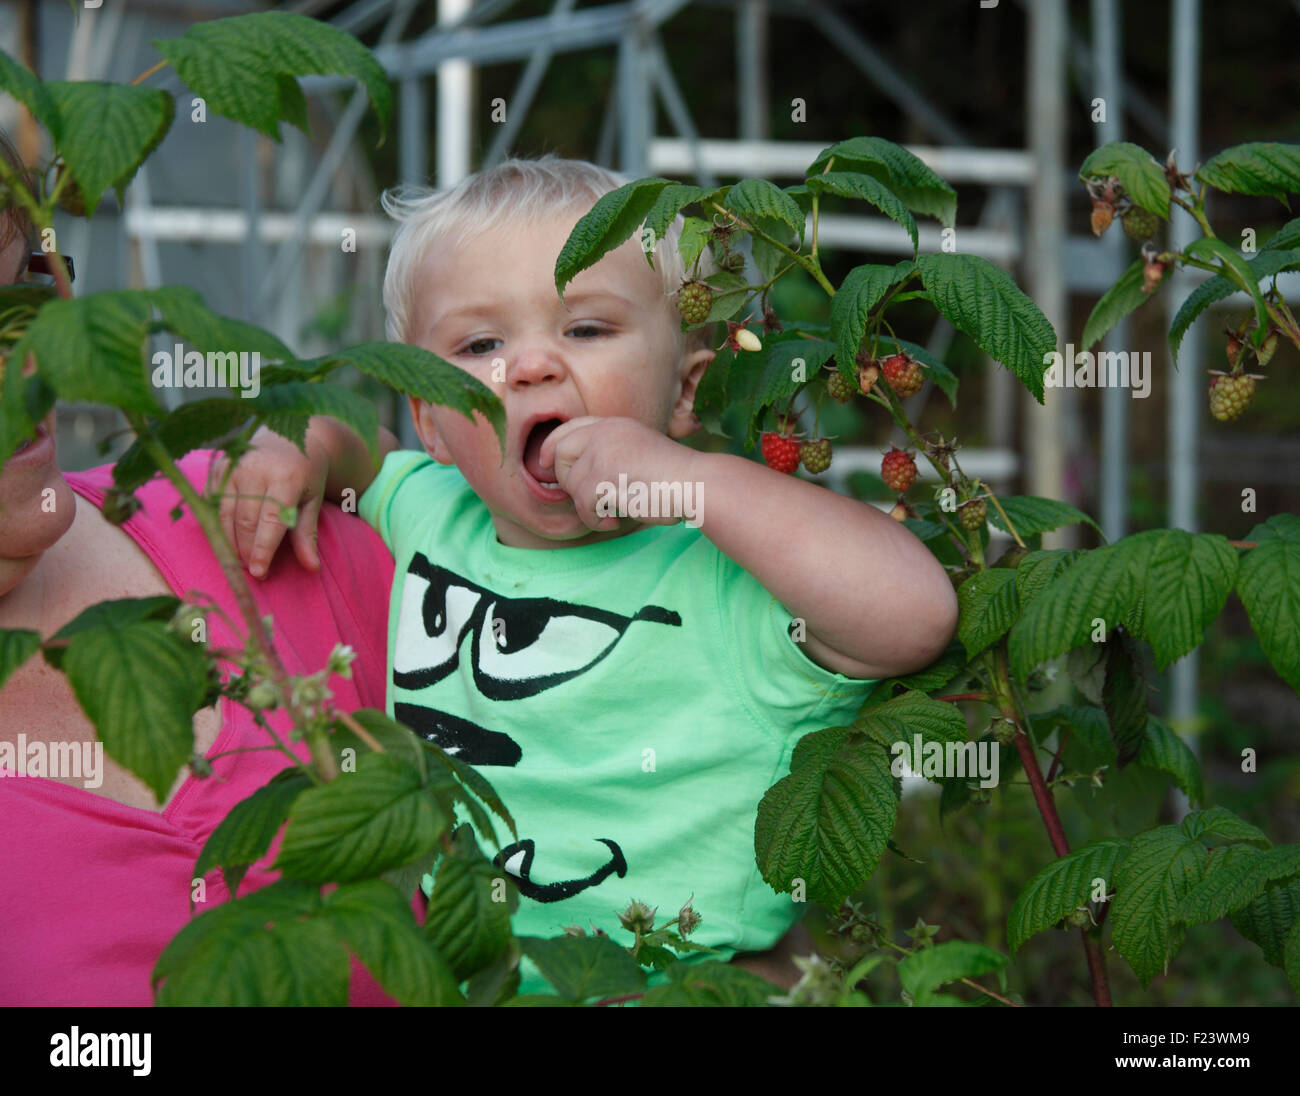 Toddler picking and eating raspberries Stock Photo